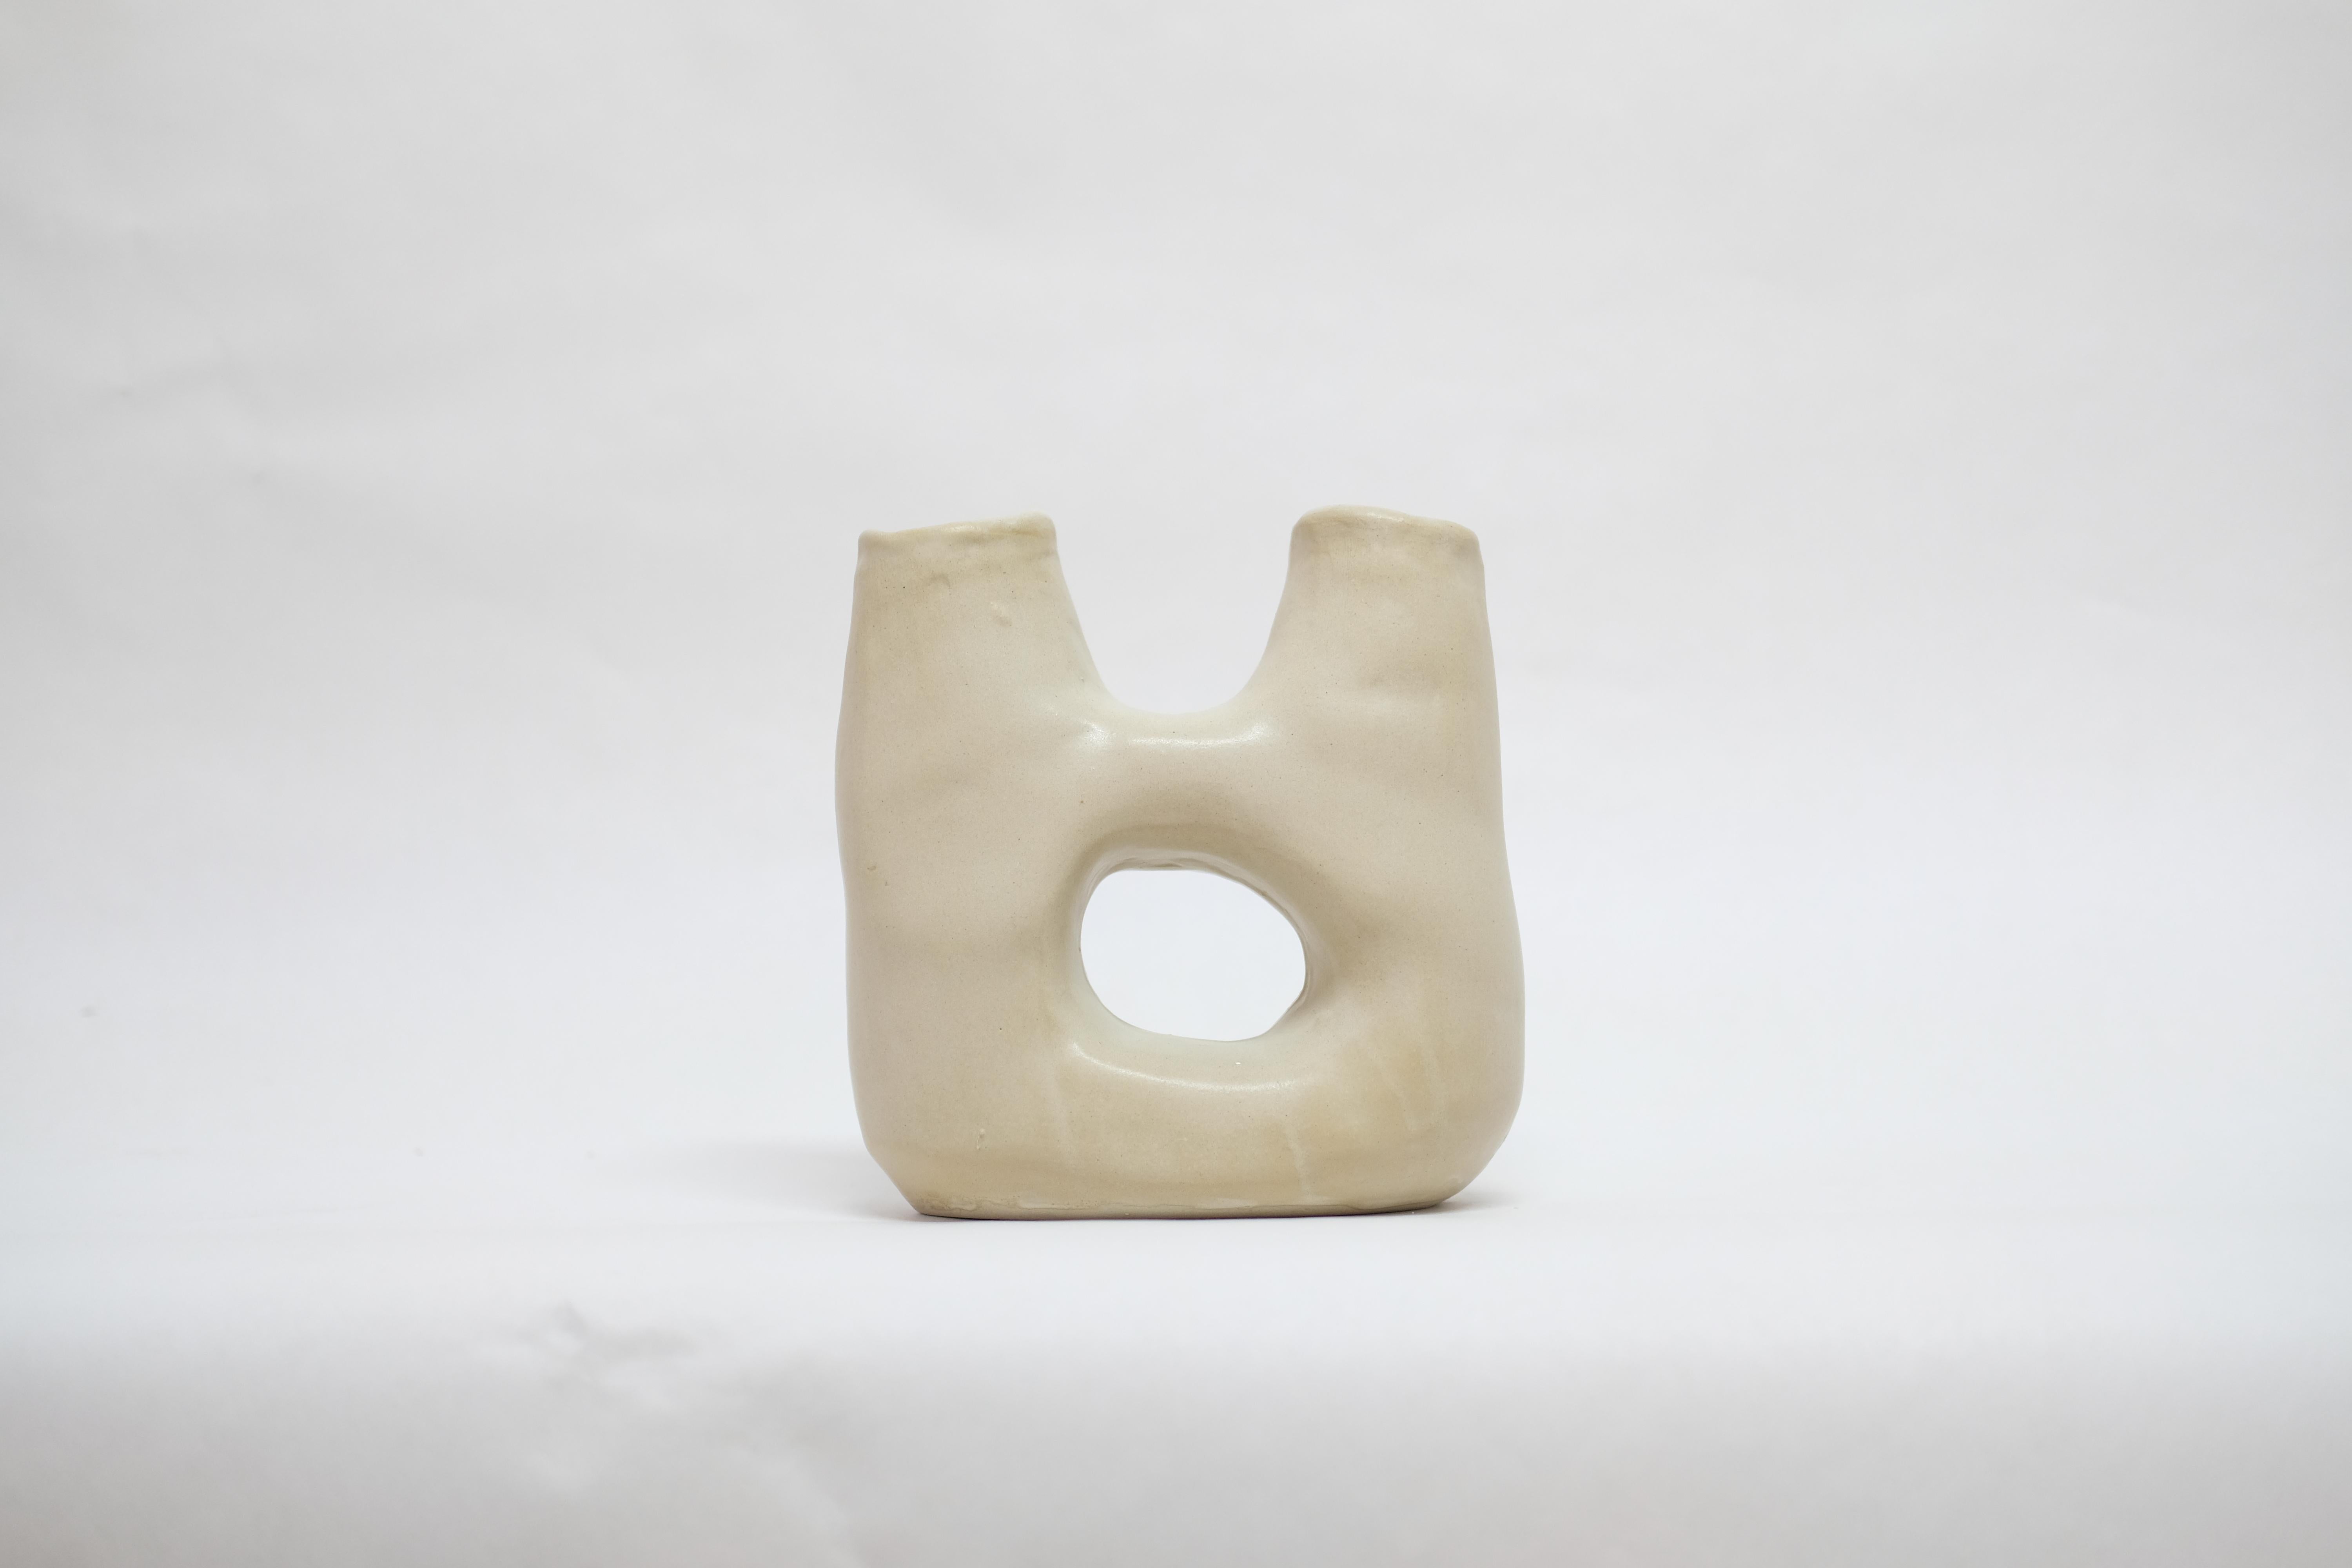 Dual No.3 Stoneware vase by Camila Apaez
One of a kind
Materials: Stoneware
Dimensions: 19 x 9 x 18 cm

This year has been shaped by the topographies of our homes and the uncertainty of our time. We have found solace in the humbleness of